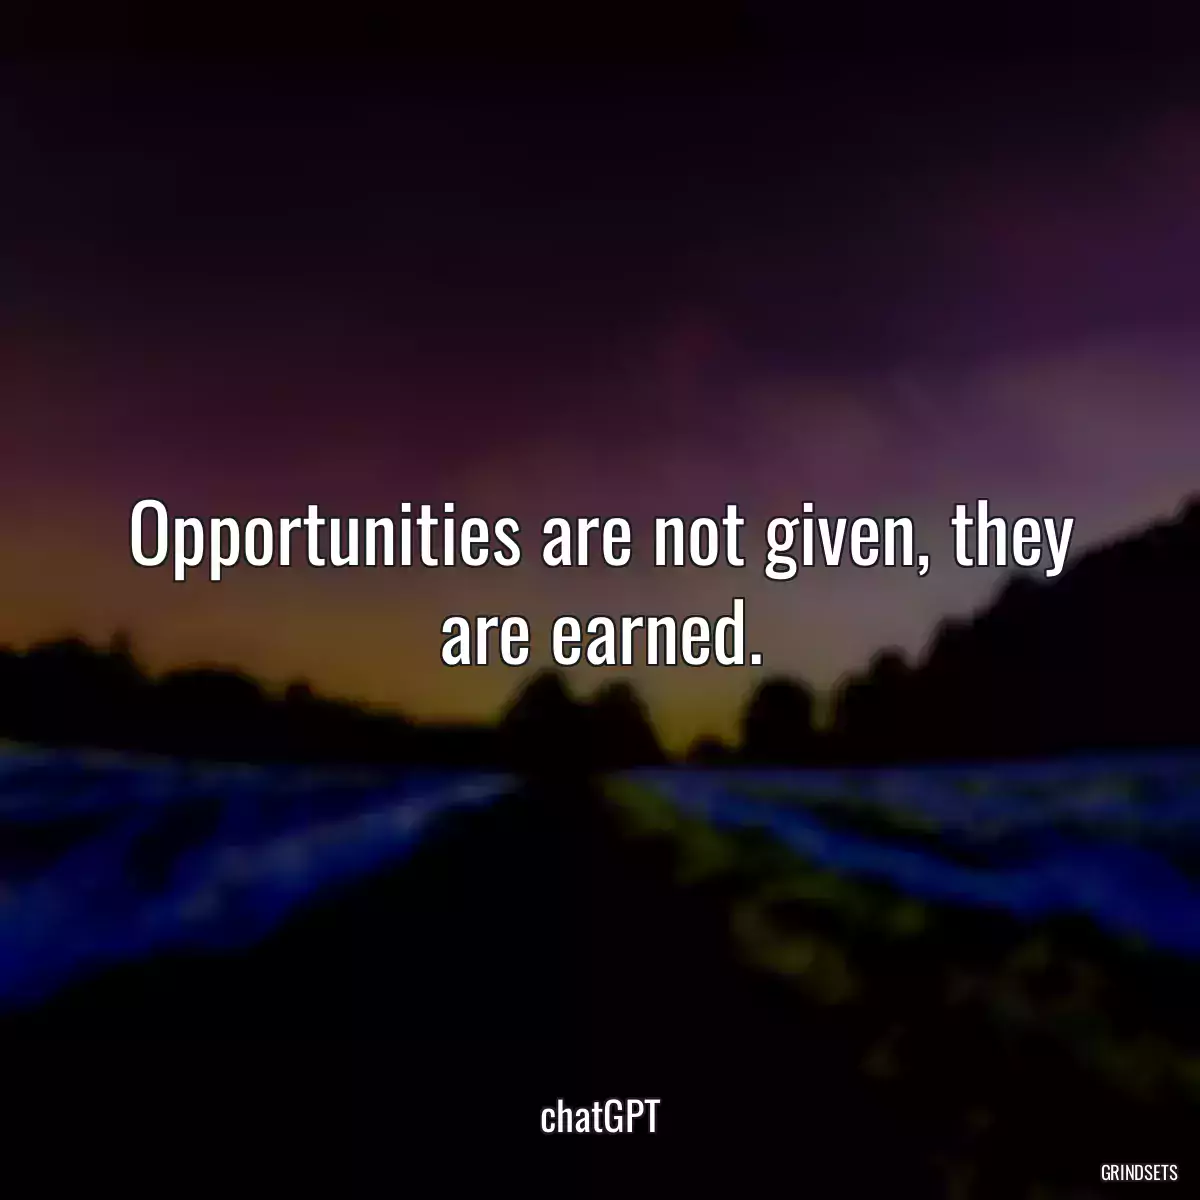 Opportunities are not given, they are earned.